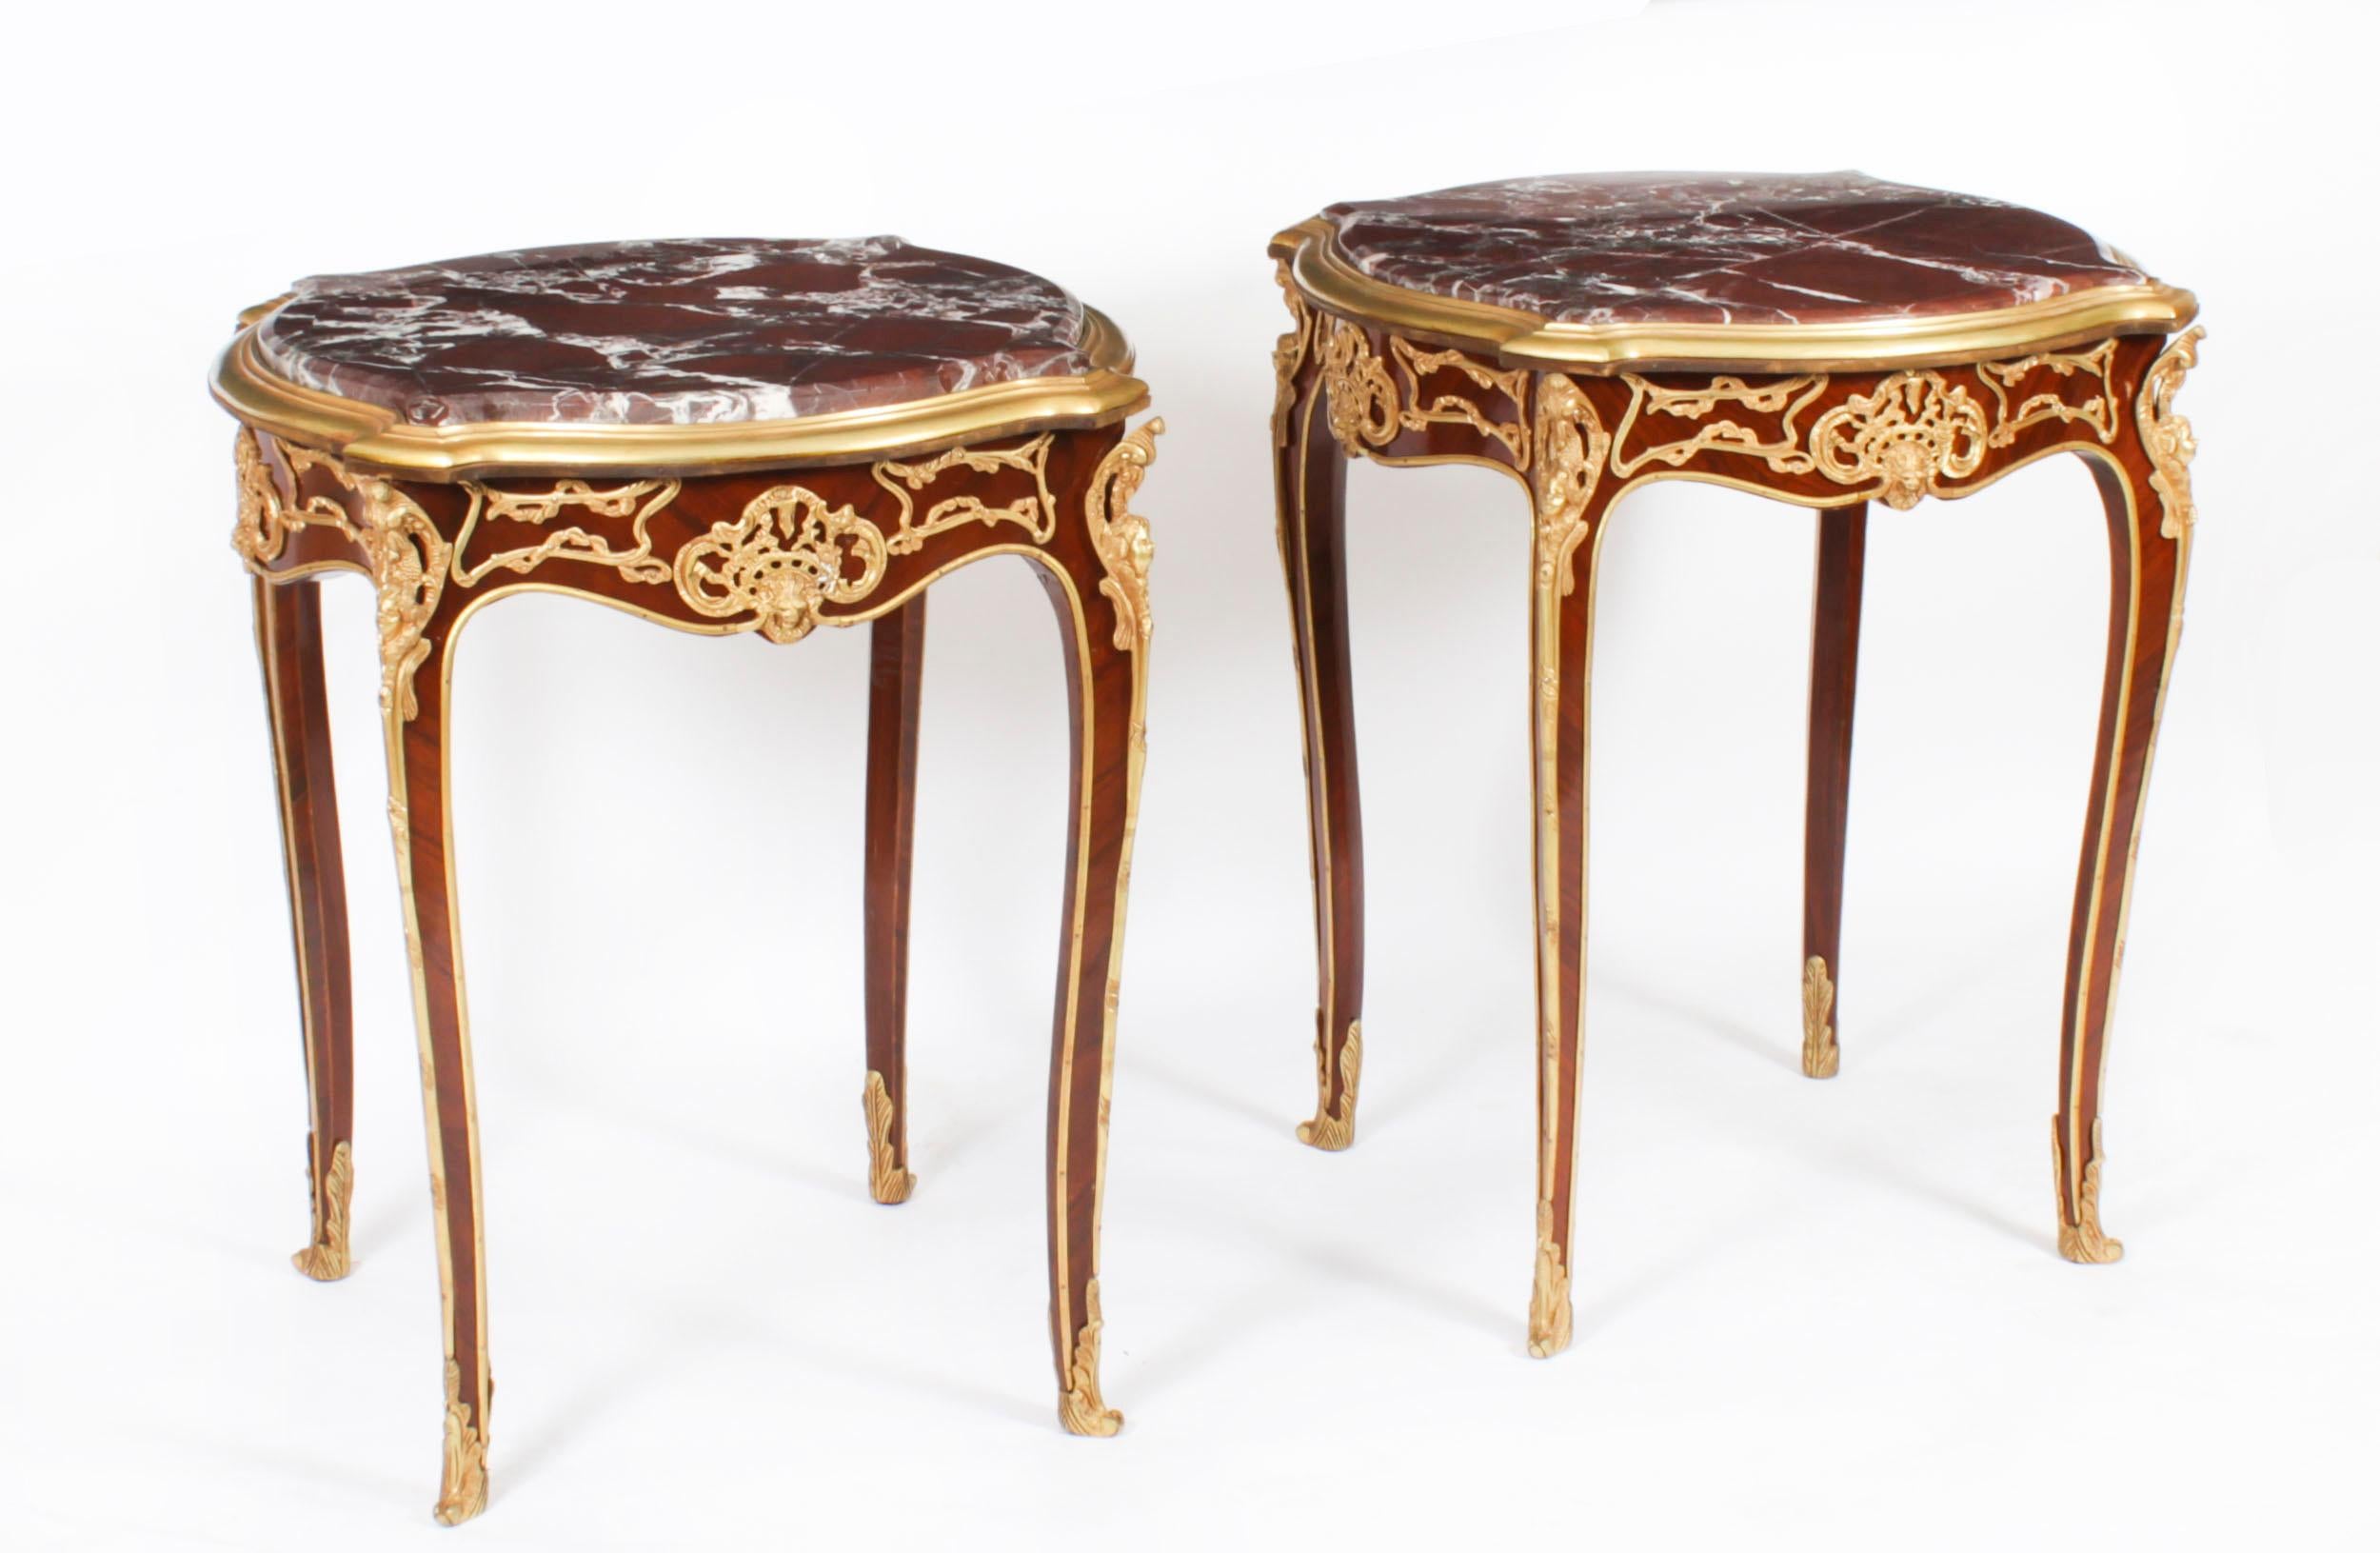 Vintage Pair French Louis Revival Marble & Ormolu Occasional Tables 20th C For Sale 9